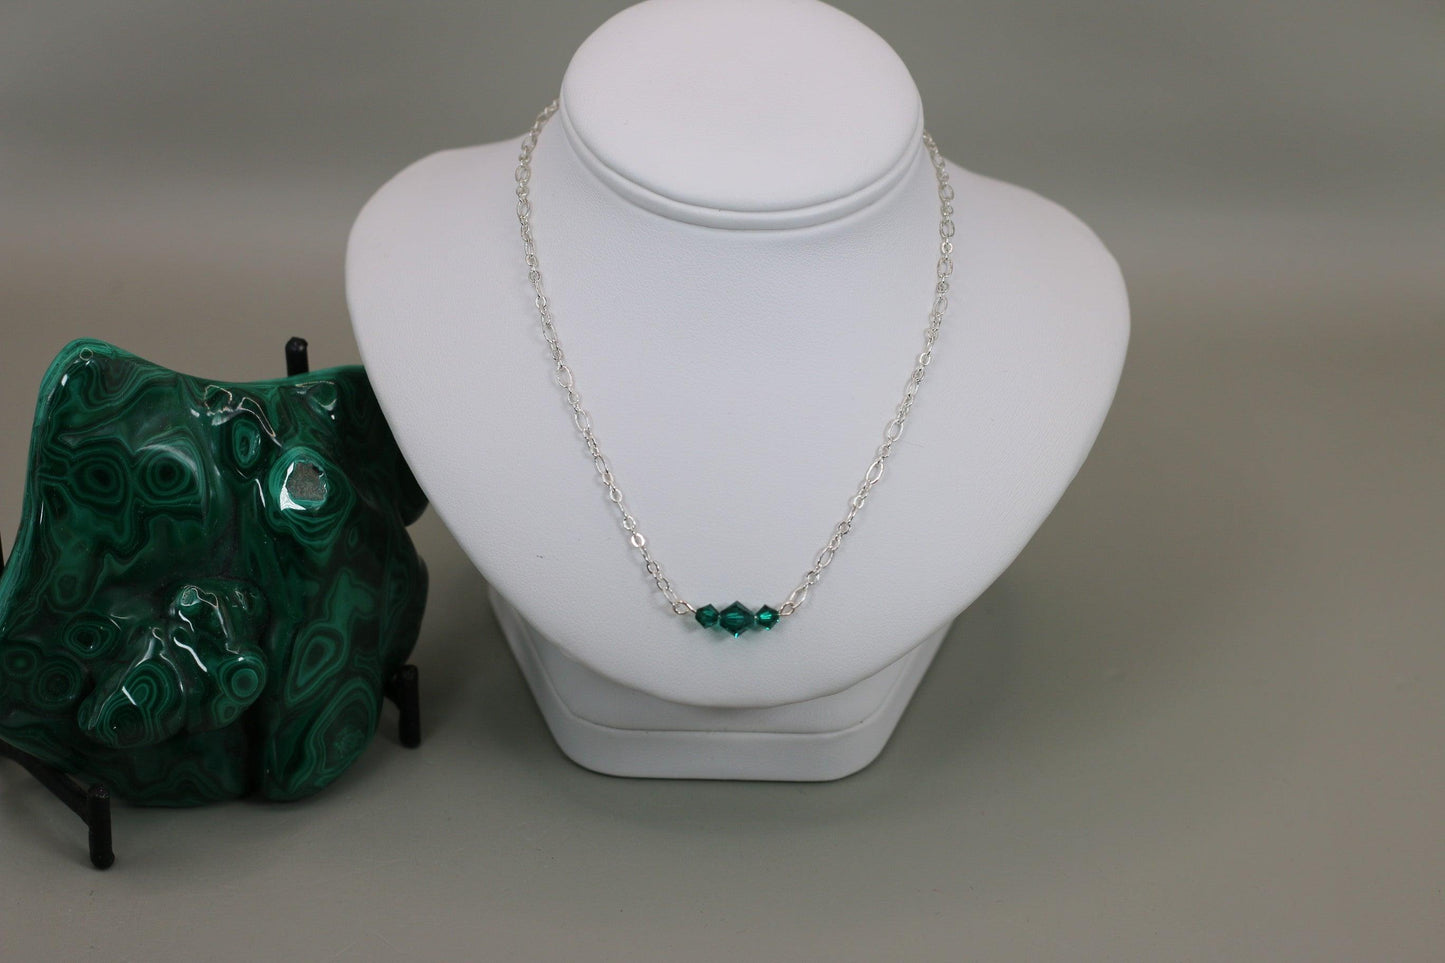 Emerald Green Austrian Crystals - Annabel's Jewelry & Leather